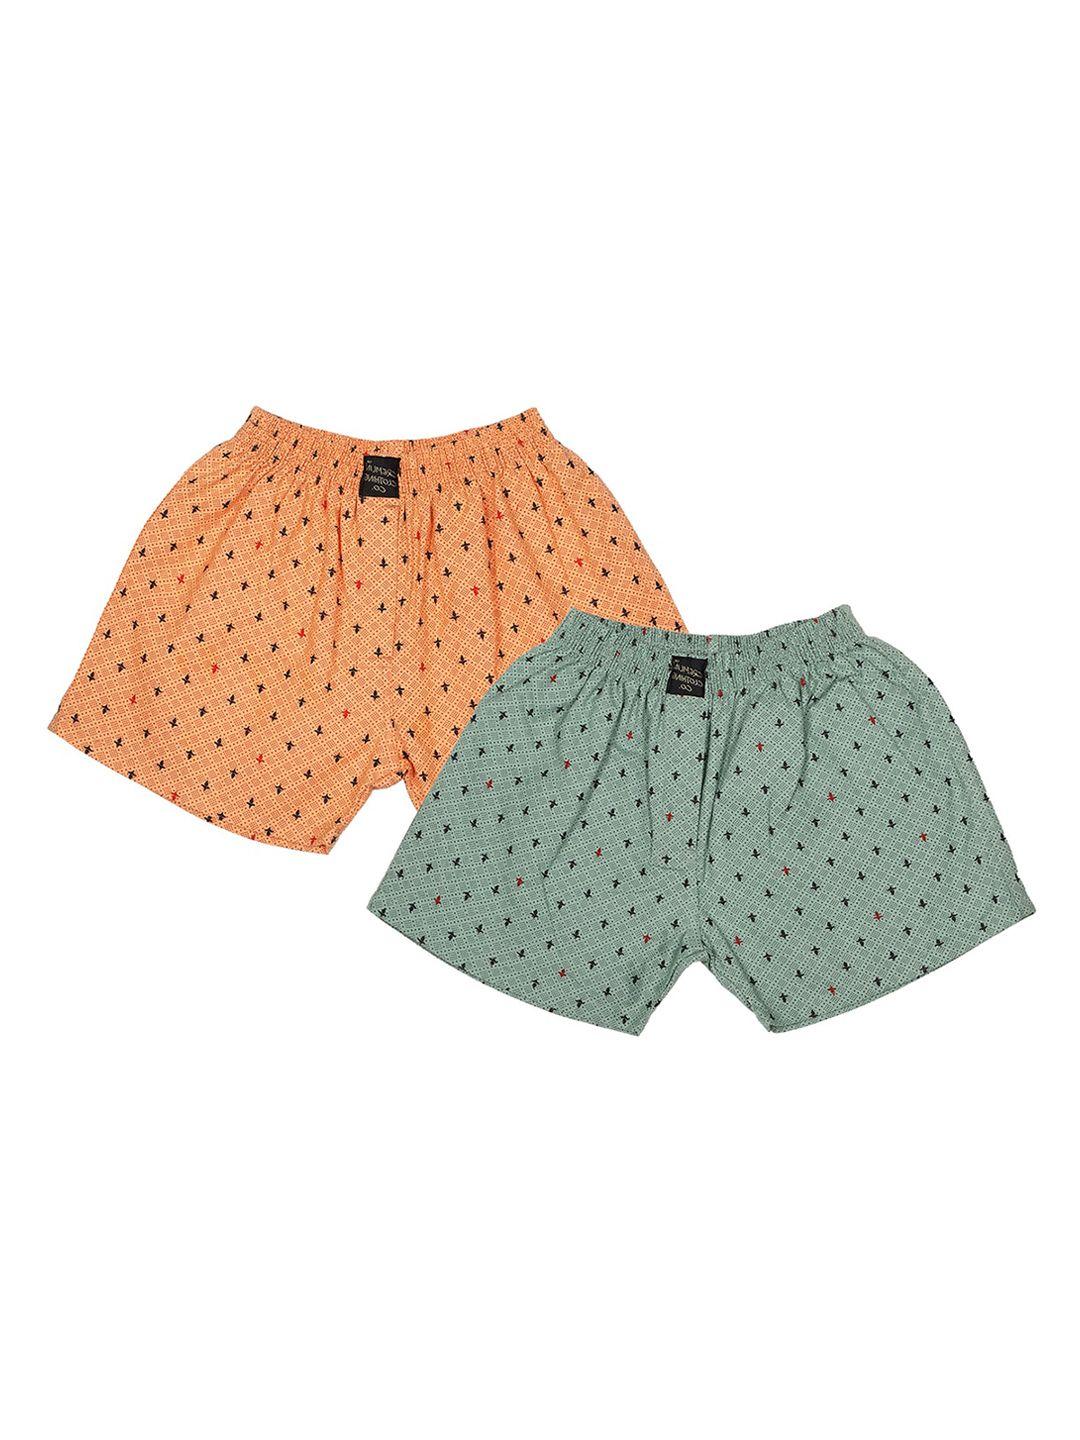 cremlin clothing boys pack of 2 orange and green printed pure cotton boxers